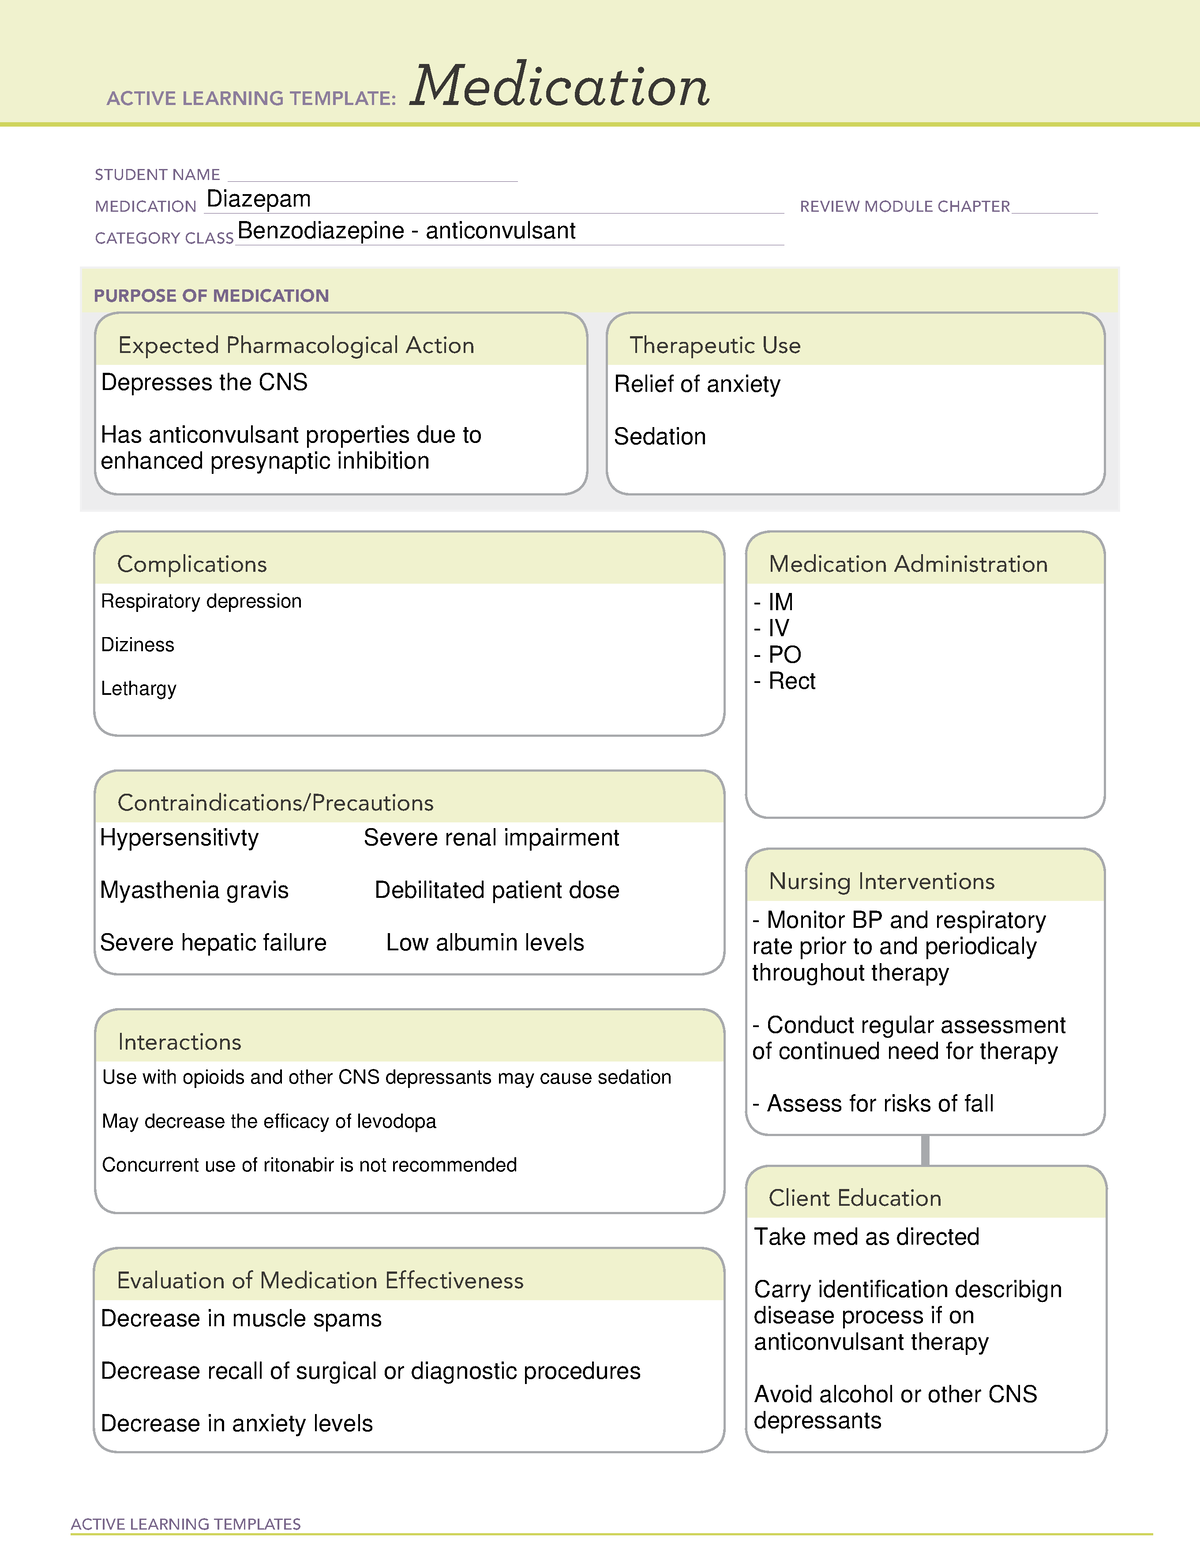 Diazepam ATI medication ACTIVE LEARNING TEMPLATES Medication STUDENT